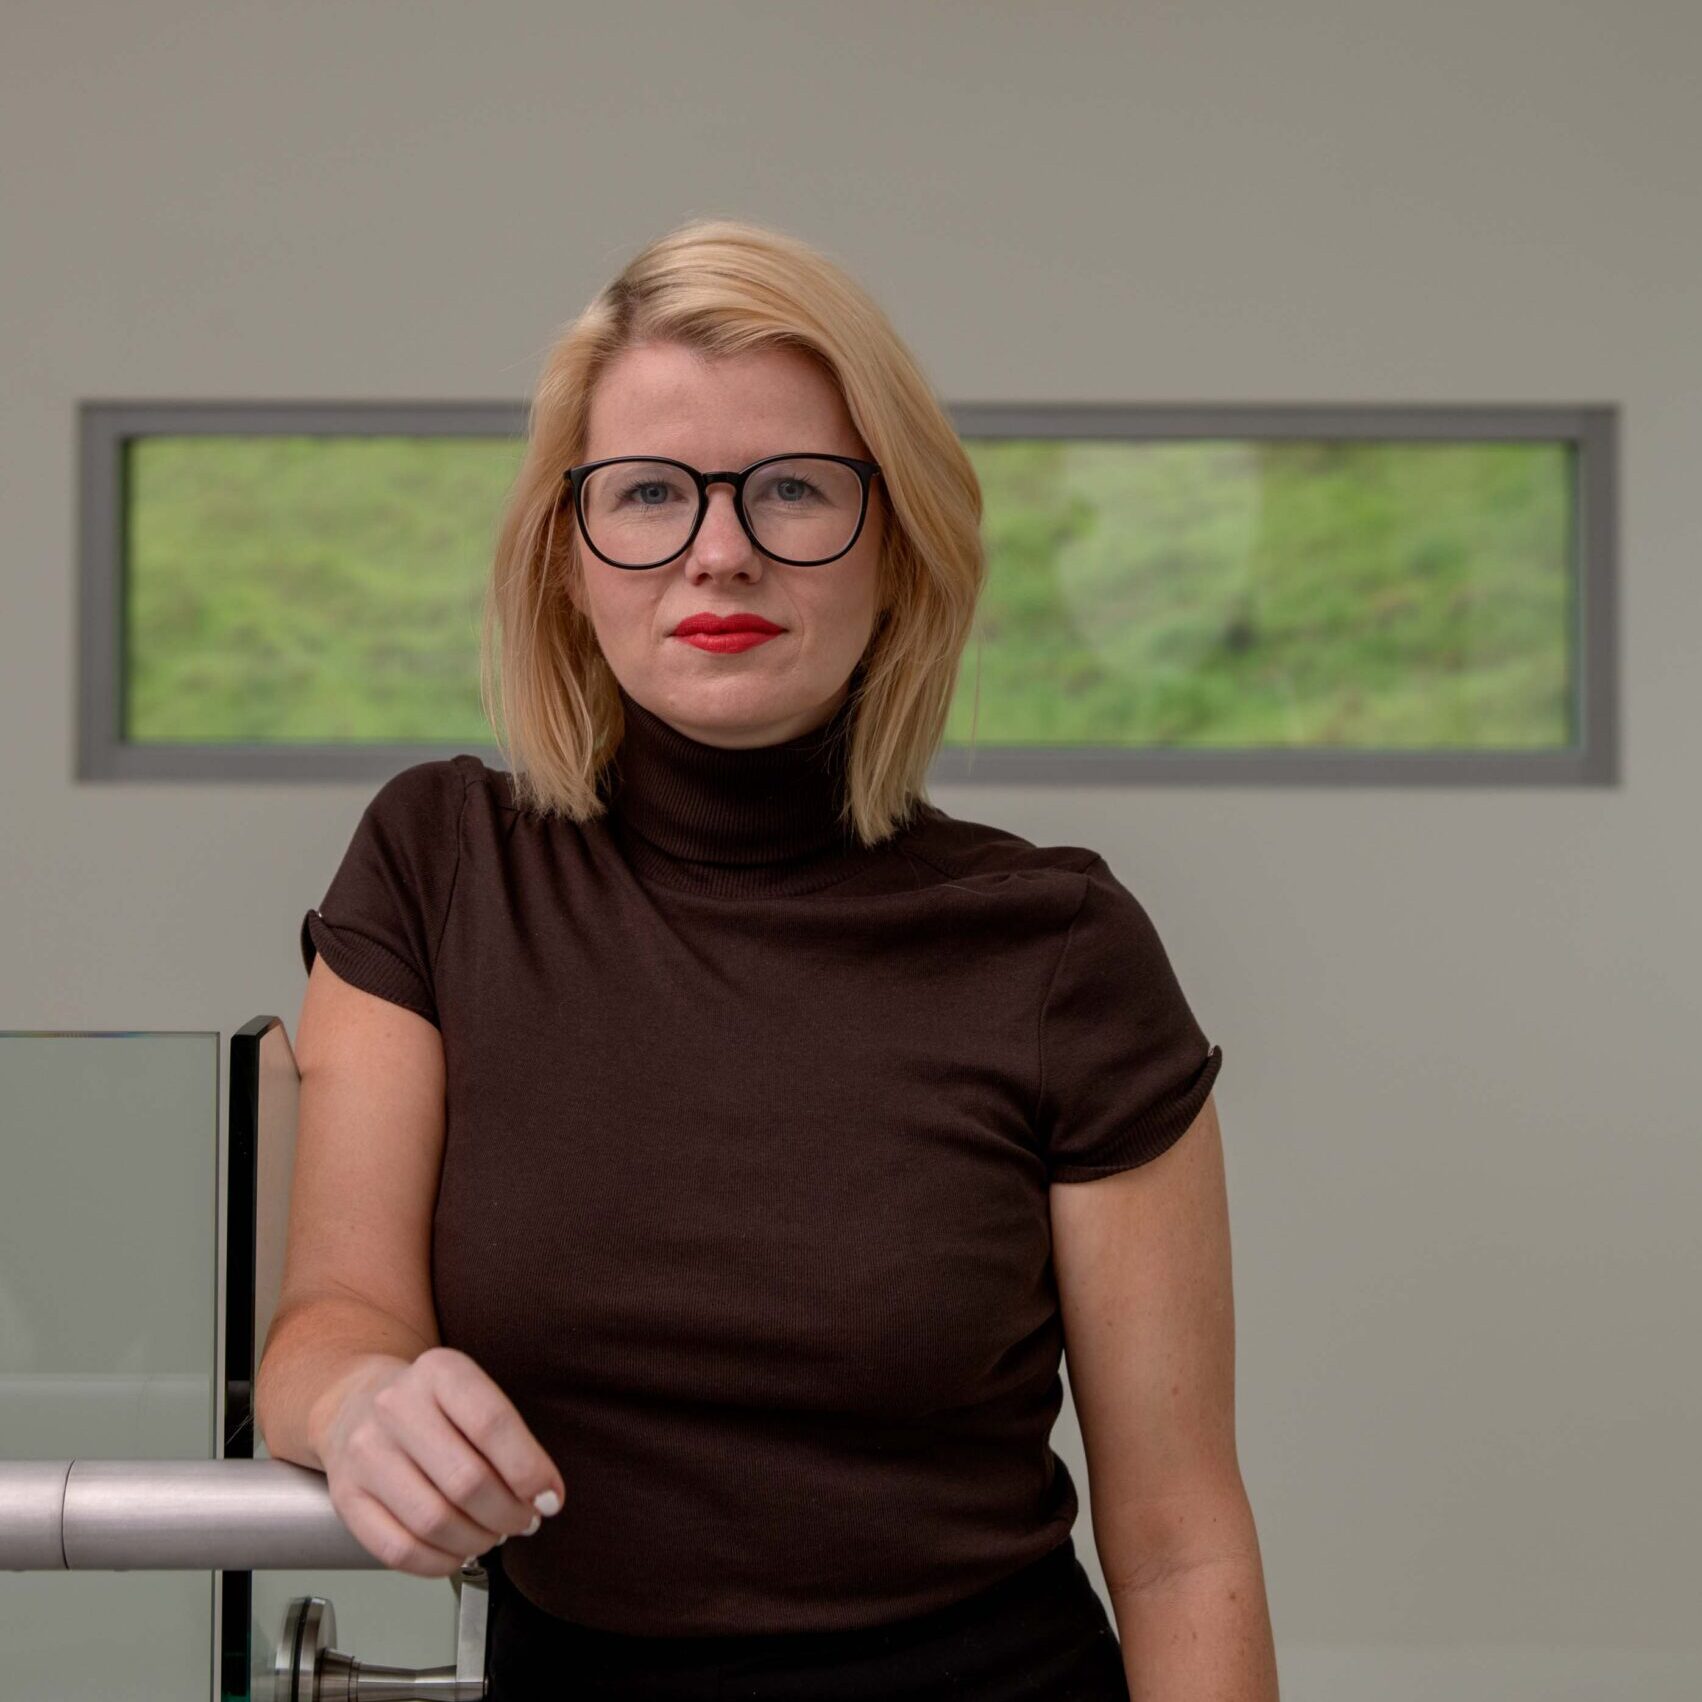 Blonde-haired person in glasses standing in front of a windowed wall.